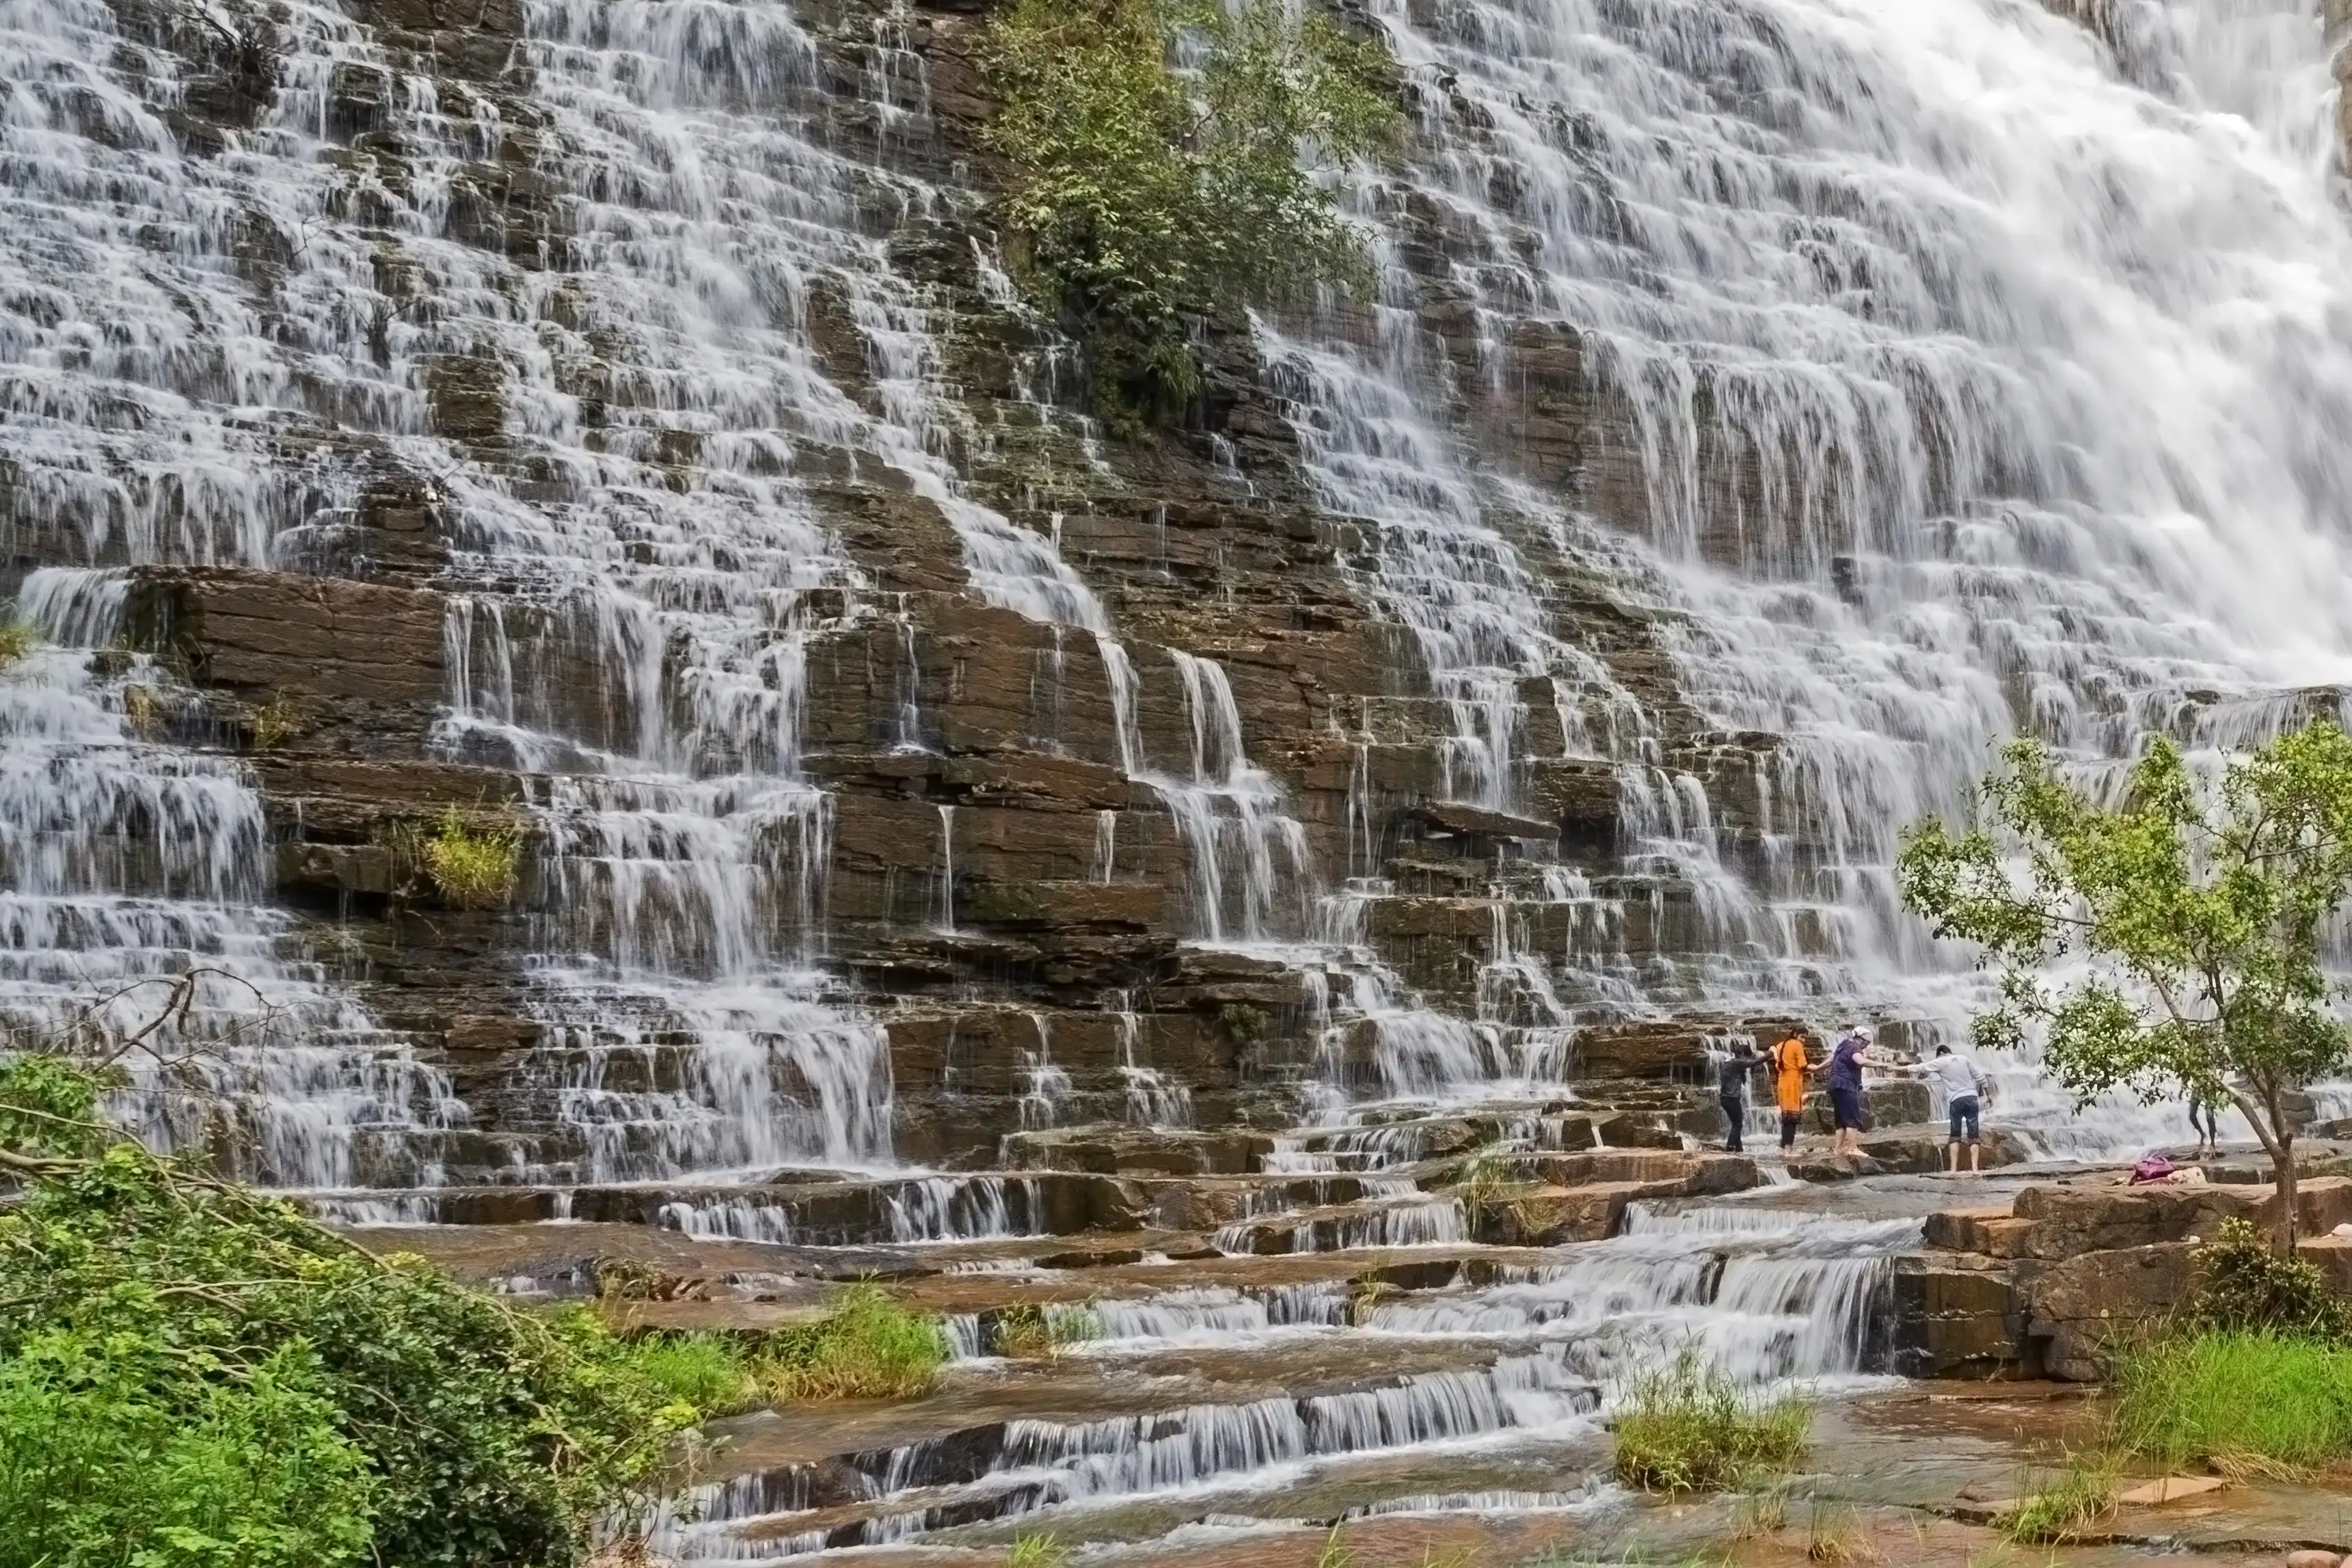 A group of friends enjoying the spectacular, magnificent sight of the milky waterfall cascaded down over the rocky hill amid the green surroundings. Teerathgarh Falls, Chhattisgarh, India